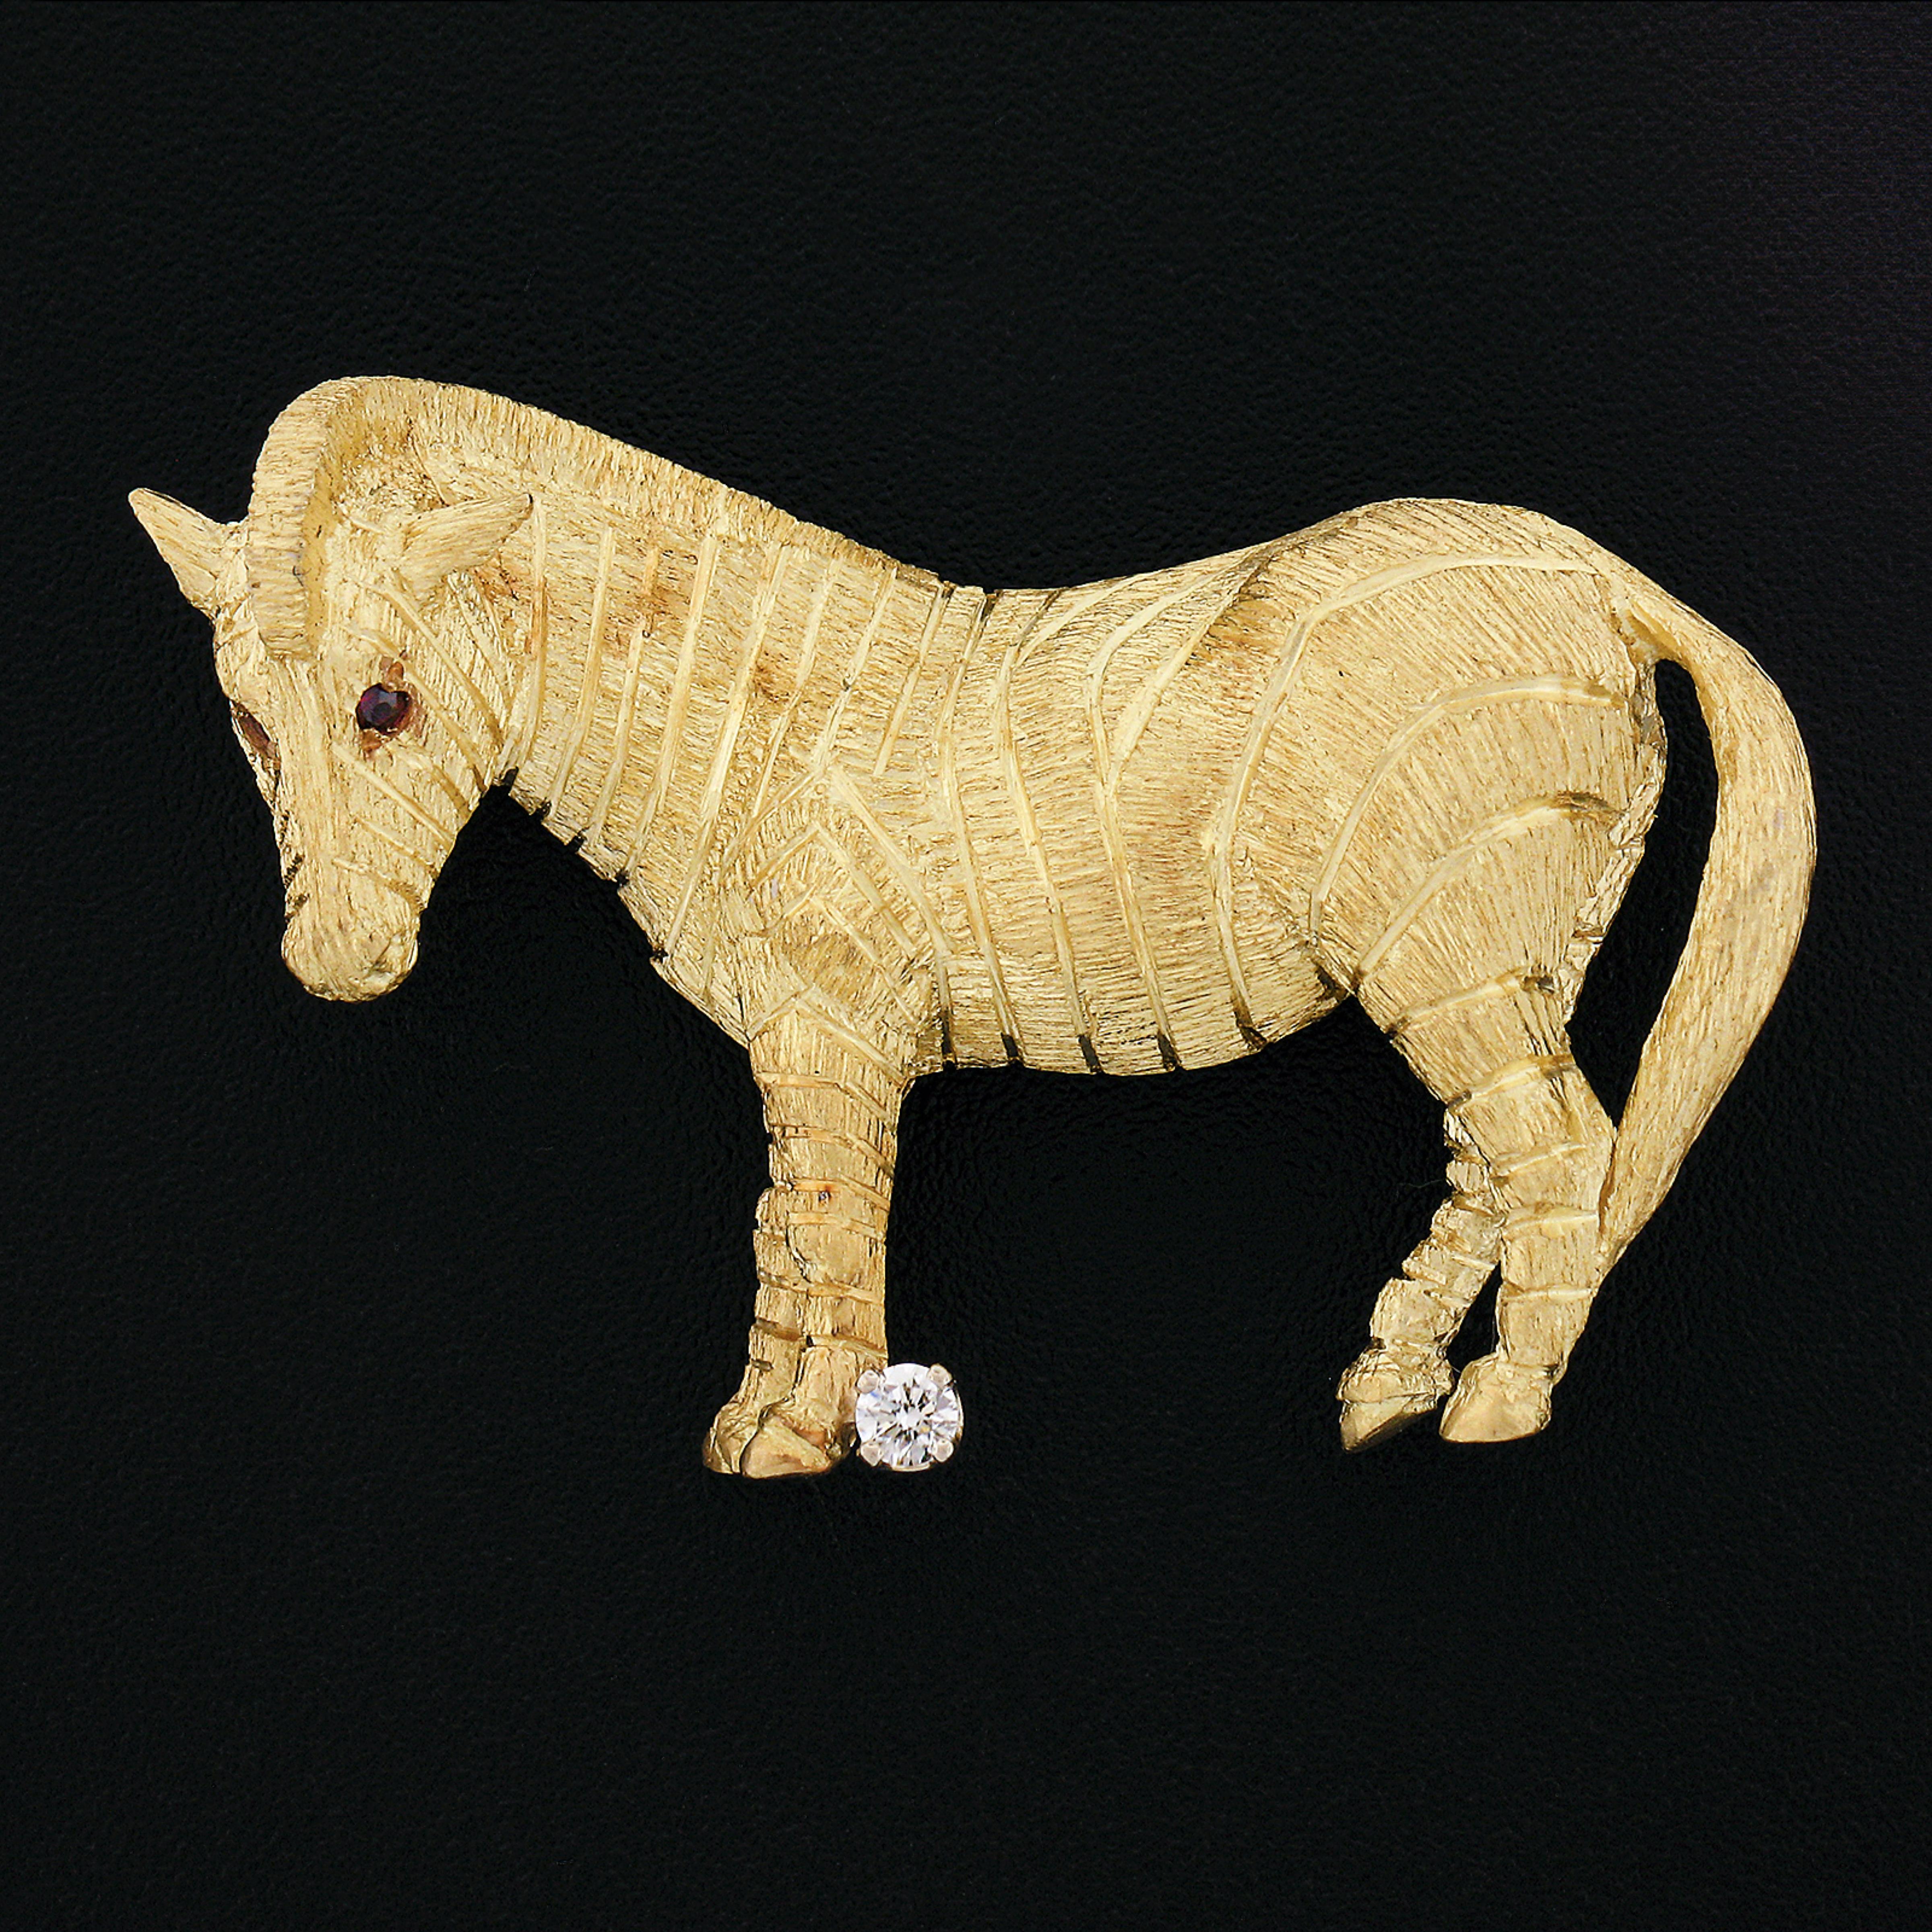 This incredible brooch/pin is designed by Craig Drake and very well crafted in solid 18k yellow gold. It features a perfectly structured standing zebra design with unique, and remarkably outstanding workmanship and texture throughout that bring out